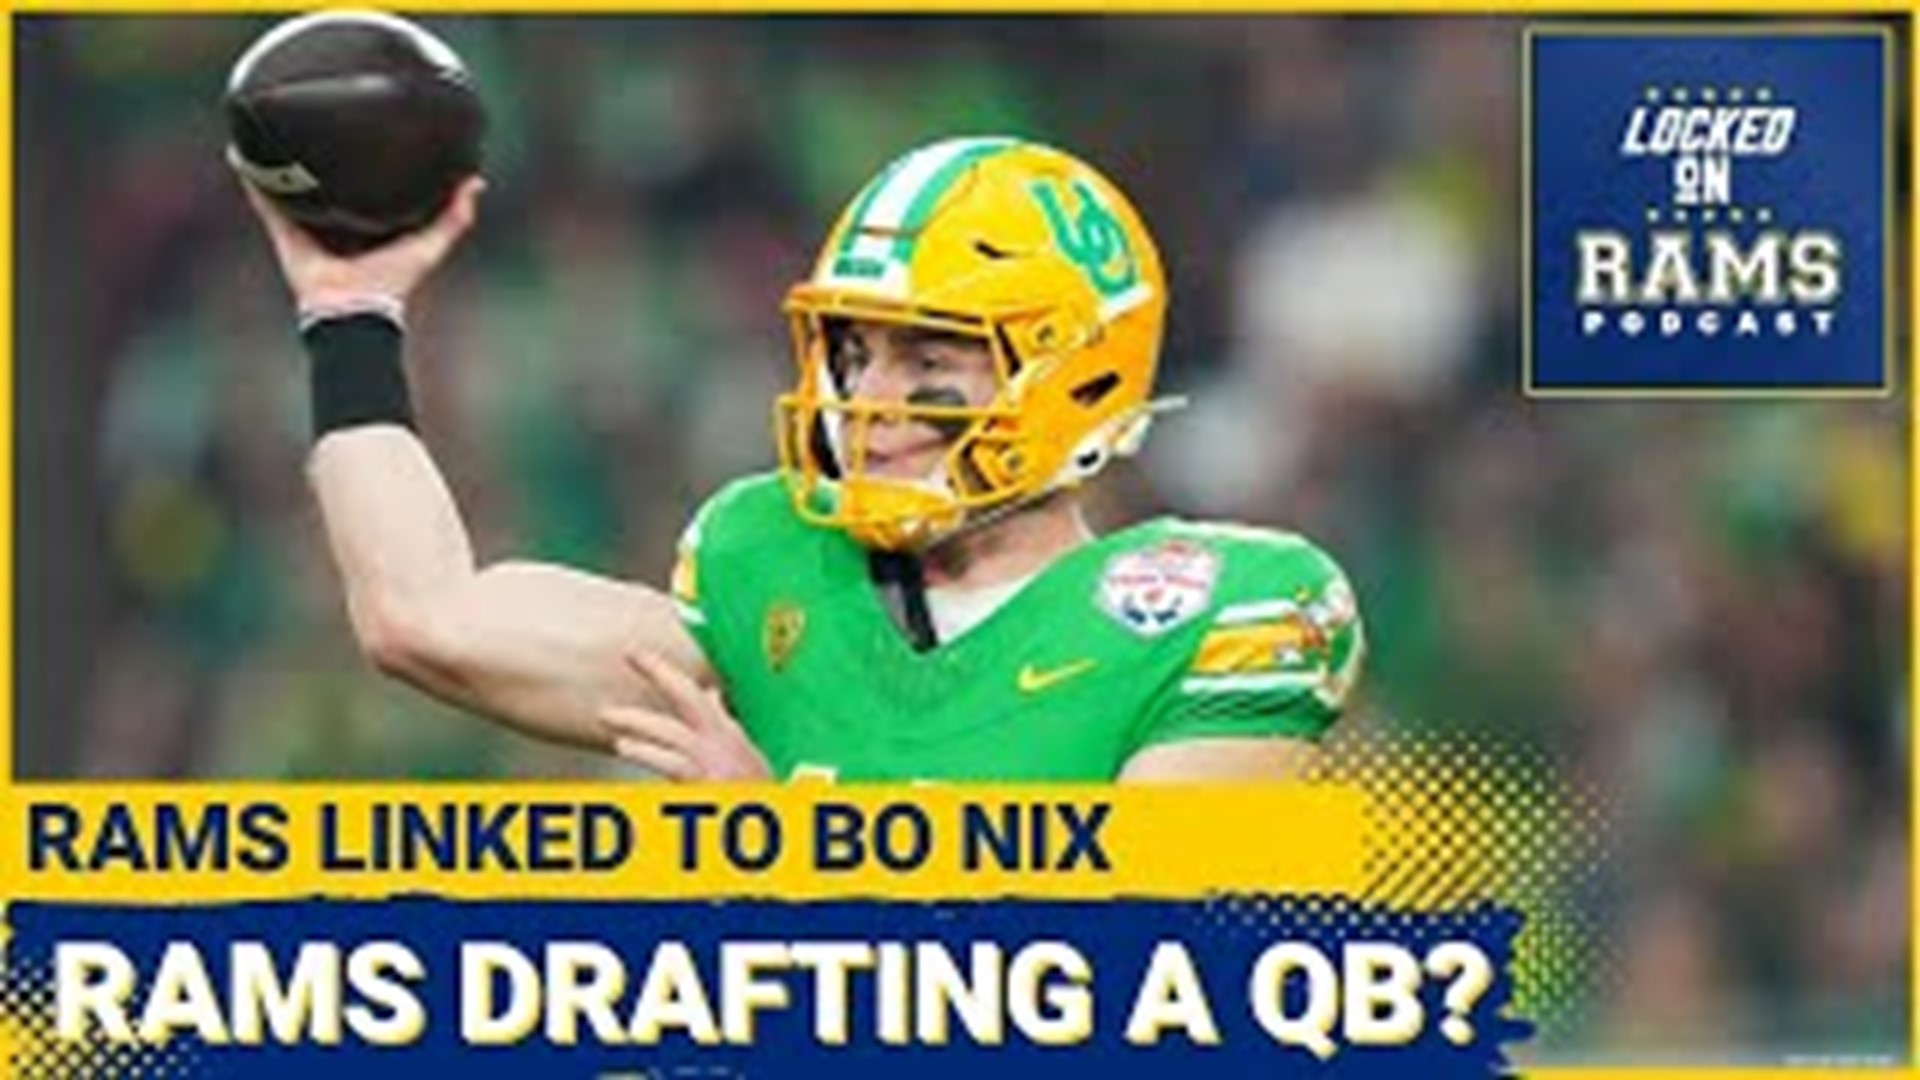 The Los Angeles Rams are rumored to be interested in drafting a quarterback in this year's NFL draft. D-mac and Travis discuss if the Rams should draft a quarterback